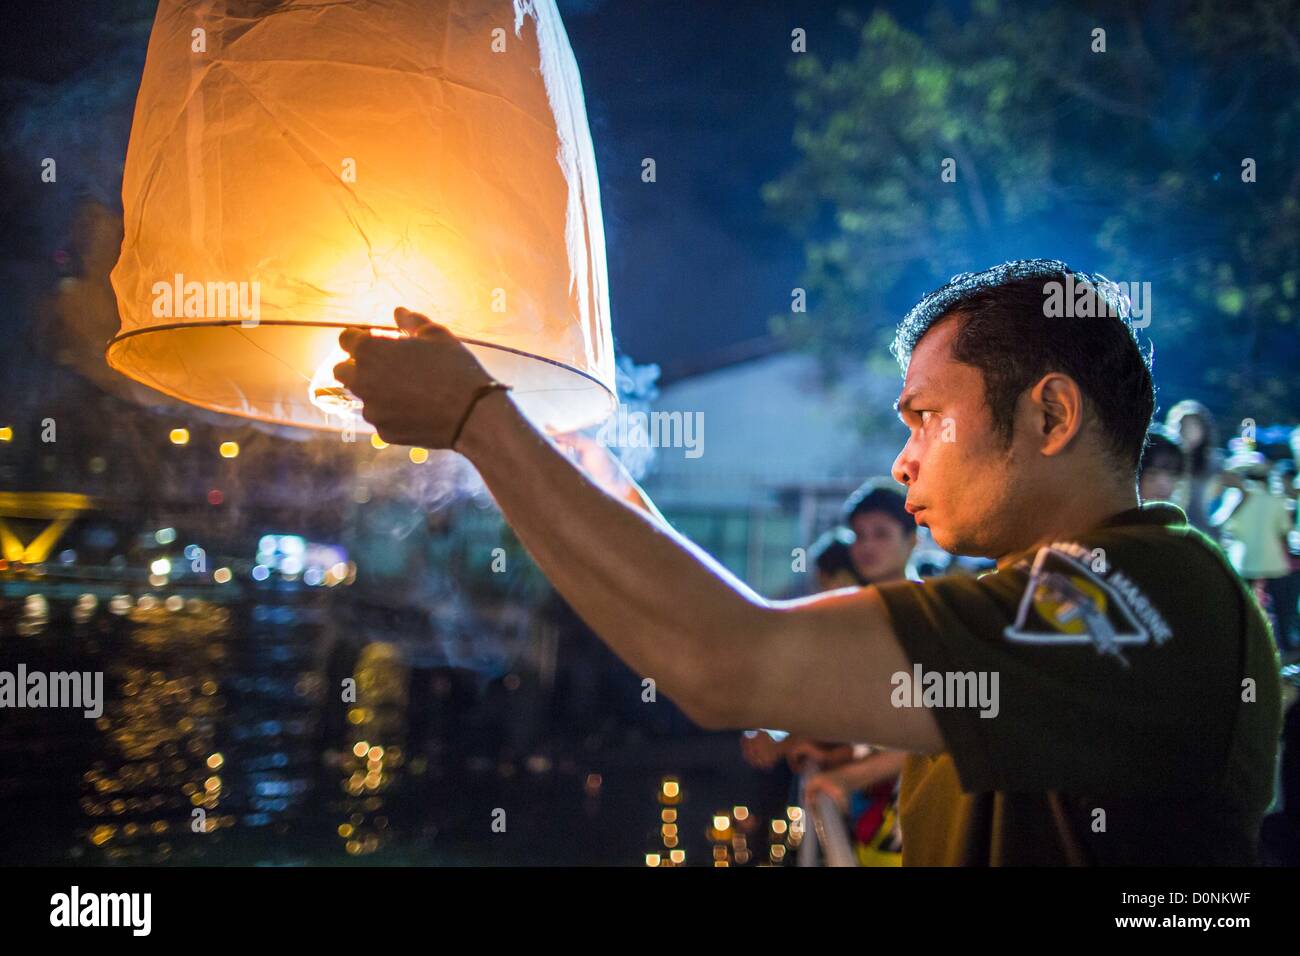 Nov. 28, 2012 - Bangkok, Thailand - A man tries to light a Khom Loi lantern  during Loy Krathong at Wat Yannawa in Bangkok. The lanterns are a part of the Loy Krathong tradition in northern Thailand, and are becoming popular in Bangkok. But authorities don't allow their use in Bangkok because of the fire danger. They try to stop people from launching the lanterns in Bangkok. Loy Krathong takes place on the evening of the full moon of the 12th month in the traditional Thai lunar calendar. In the western calendar this usually falls in November. Loy means 'to float', while krathong refers to the  Stock Photo